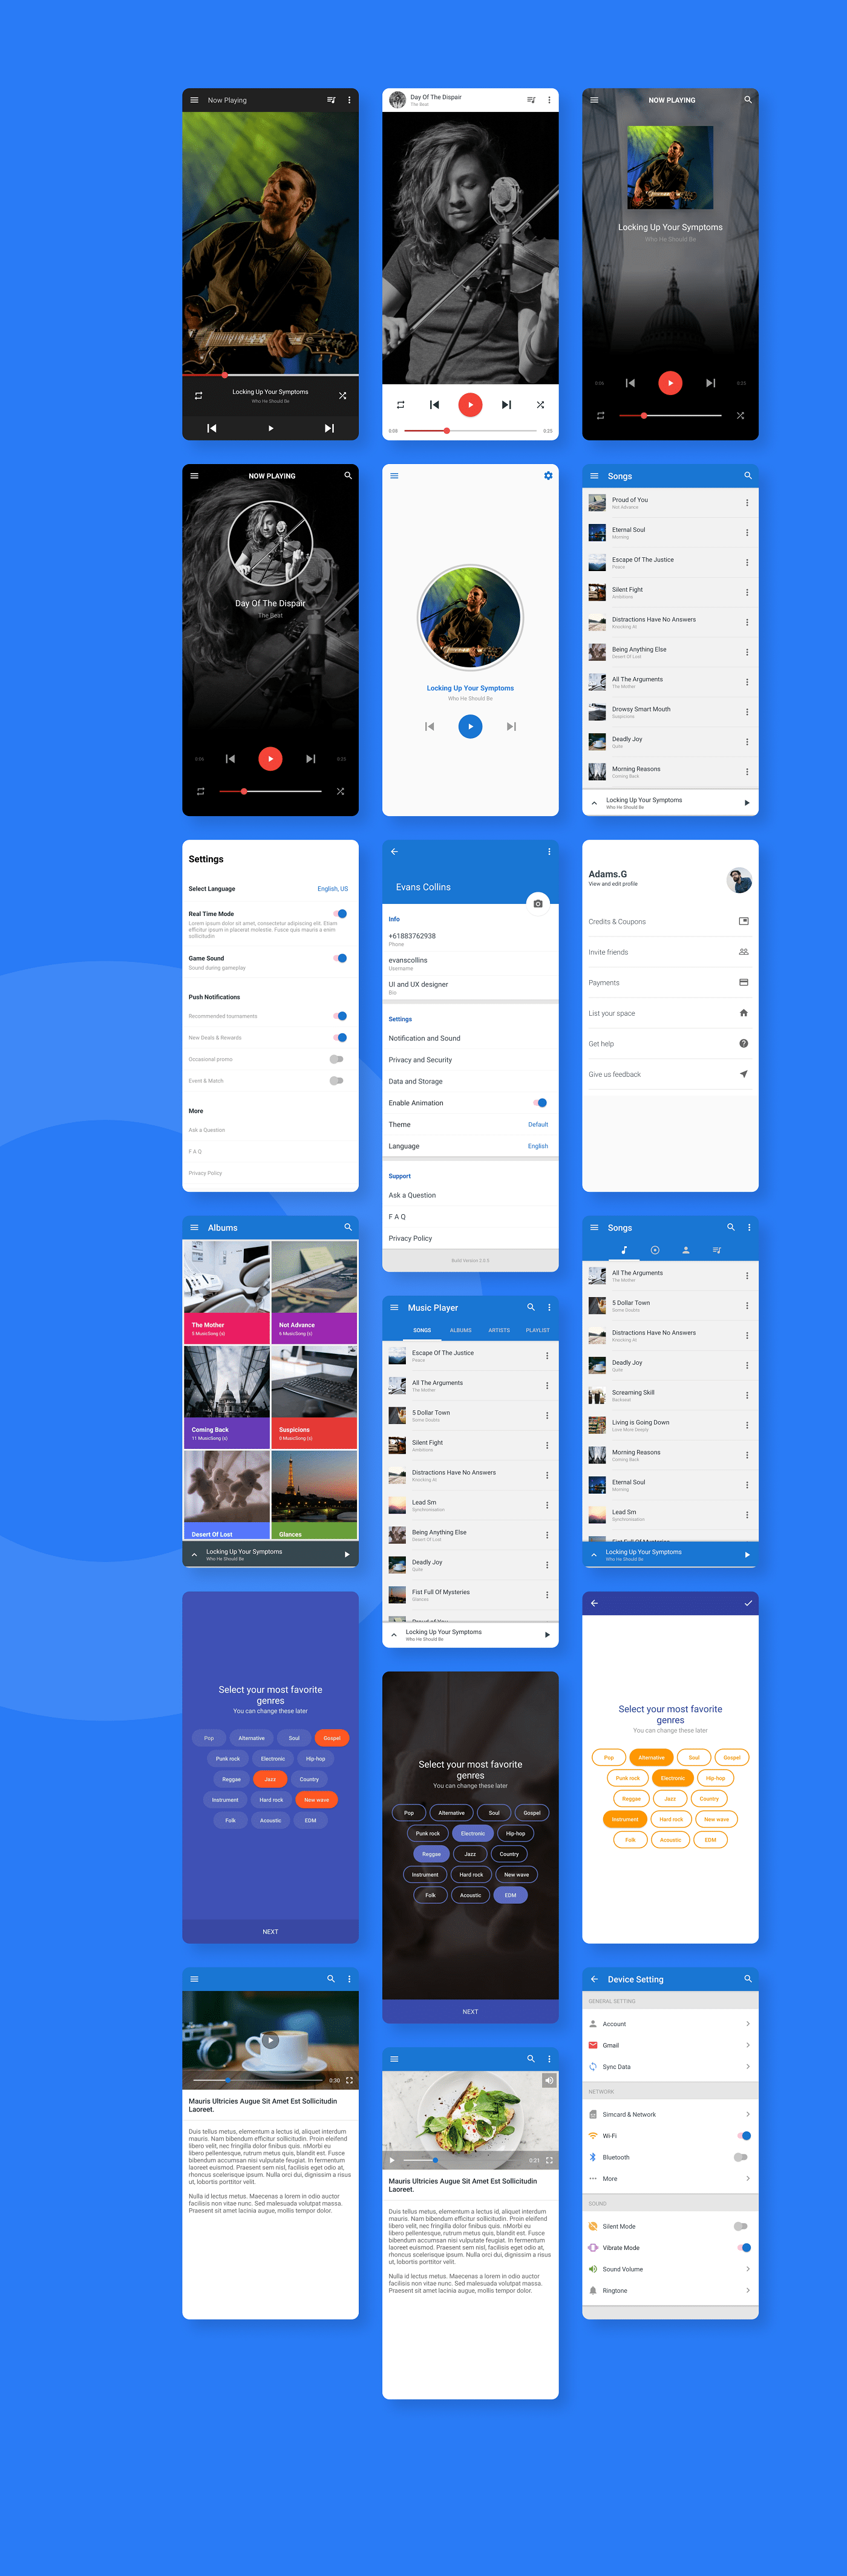 MaterialX - Android Material Design UI Components 2.7 - 26